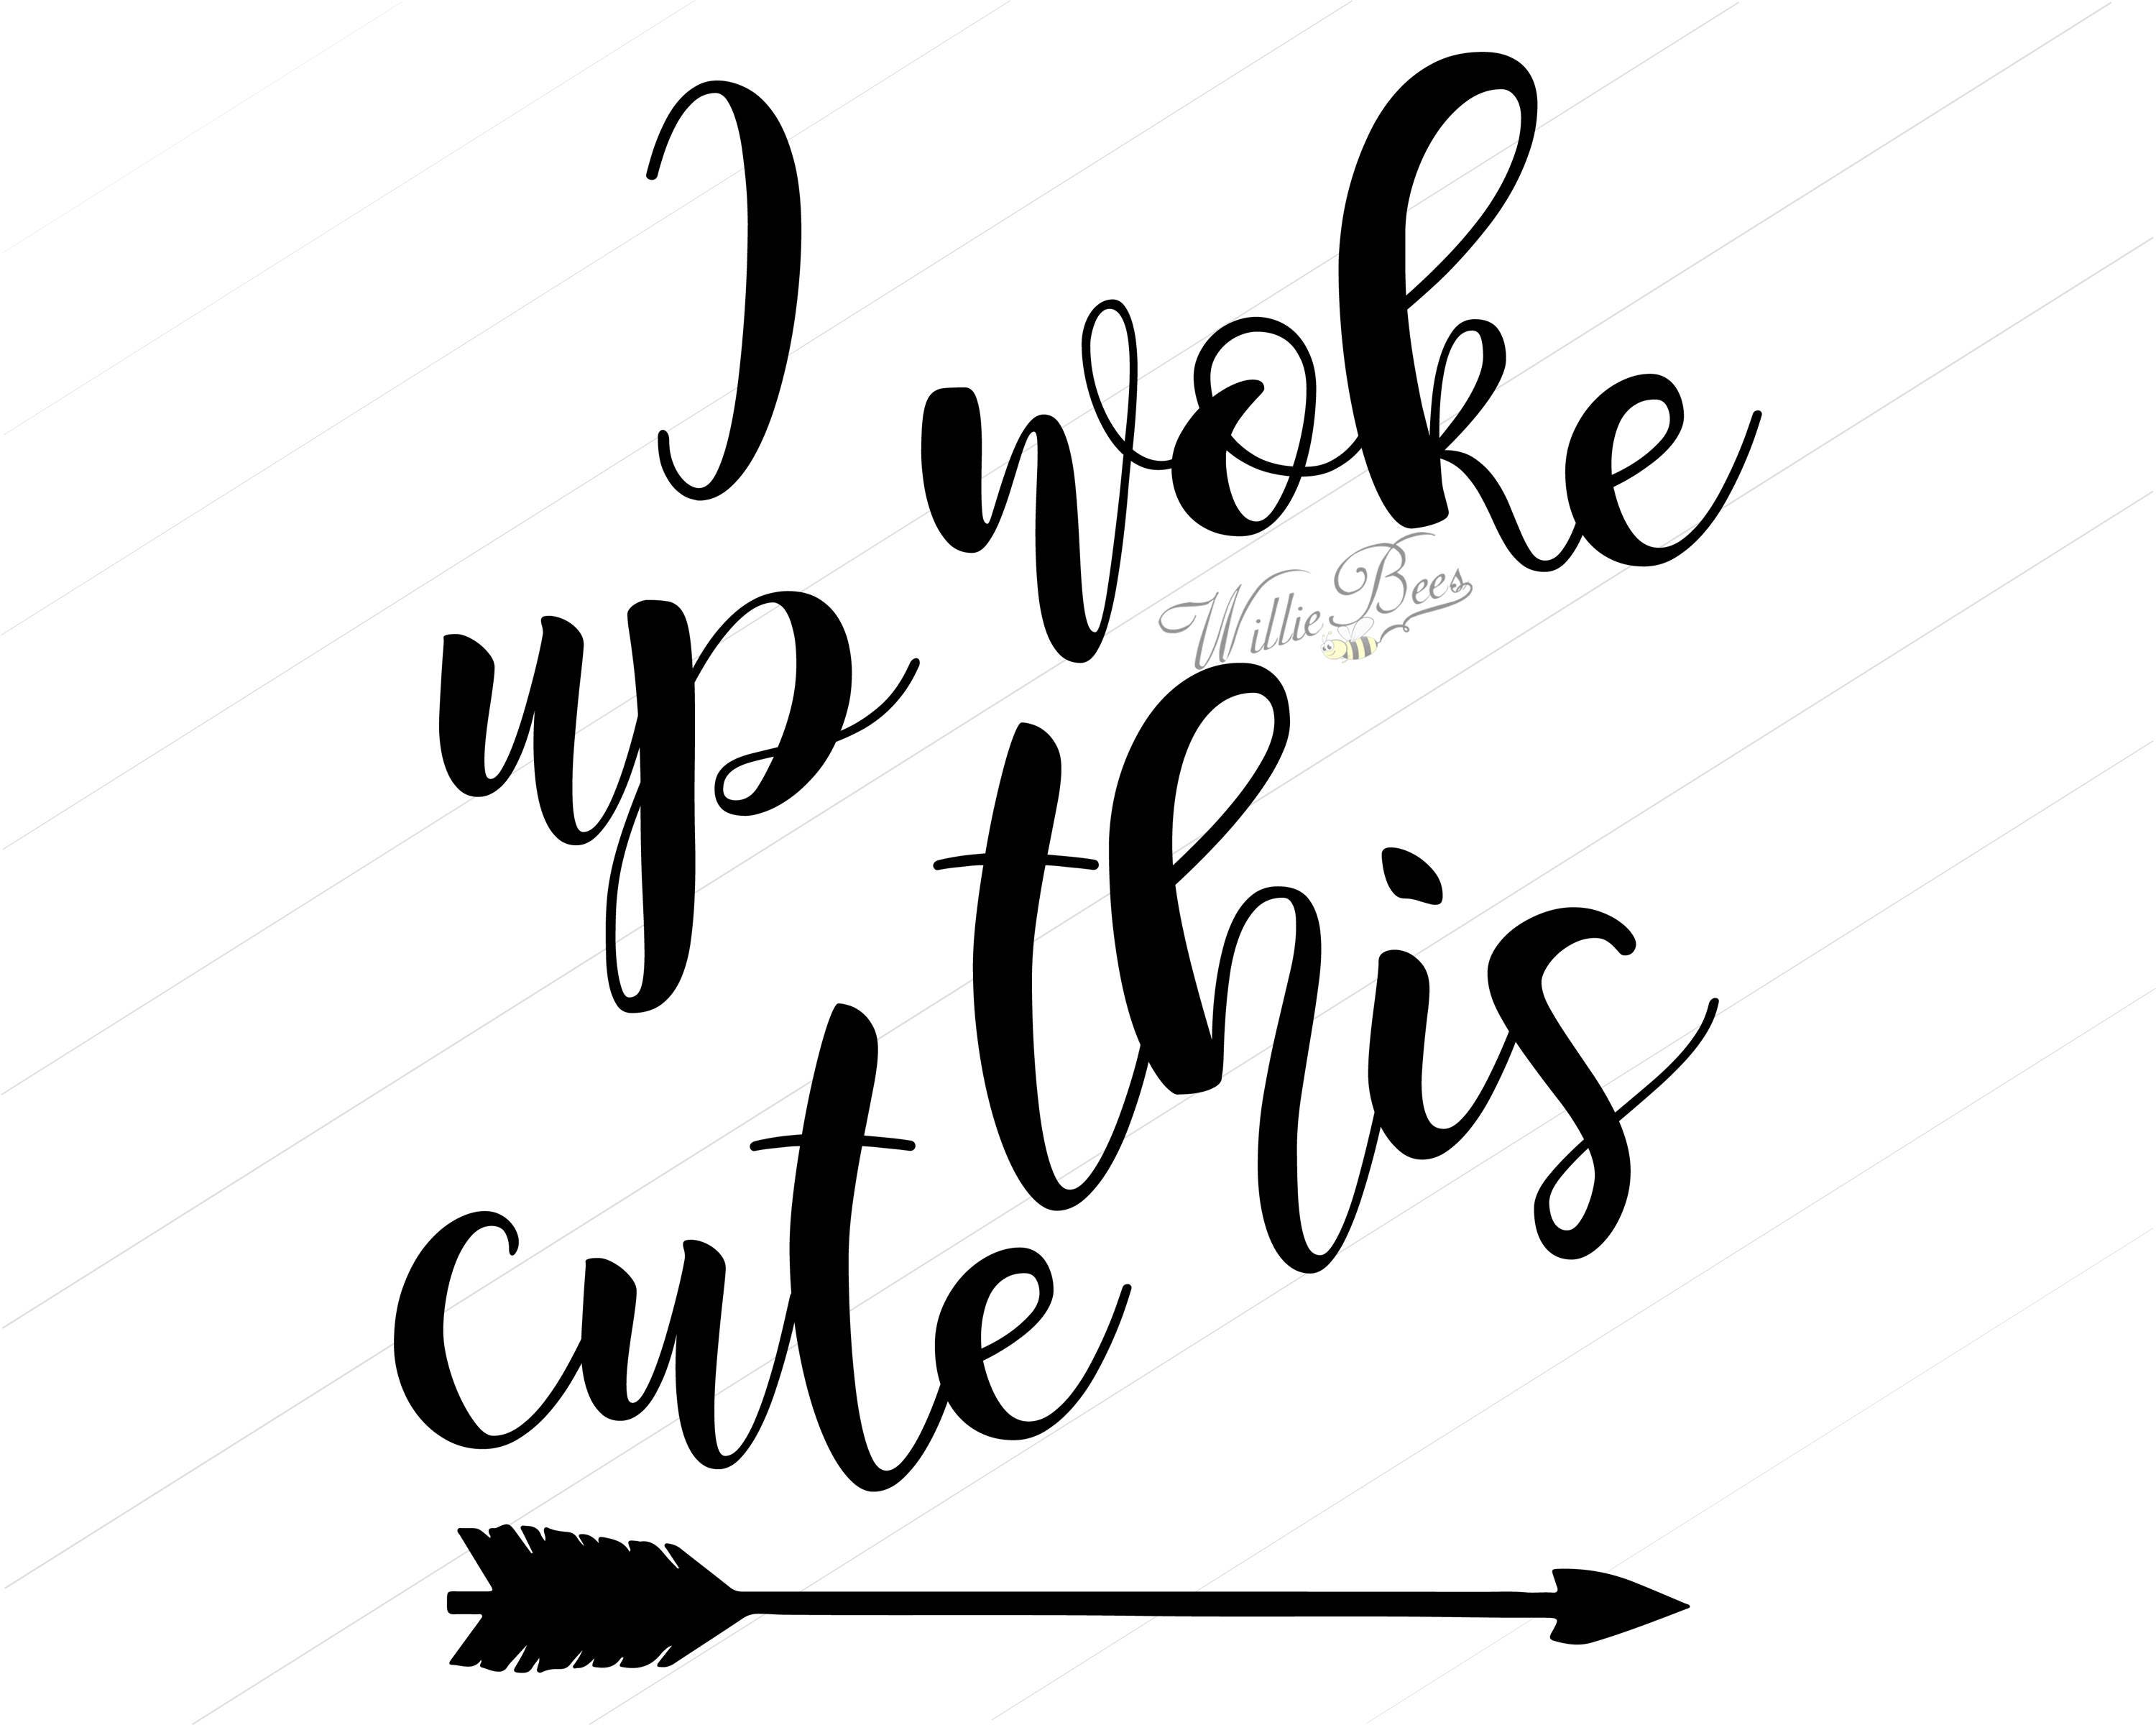 Download Arrow SVG I Woke Up This Cute Silhouette Child Quote